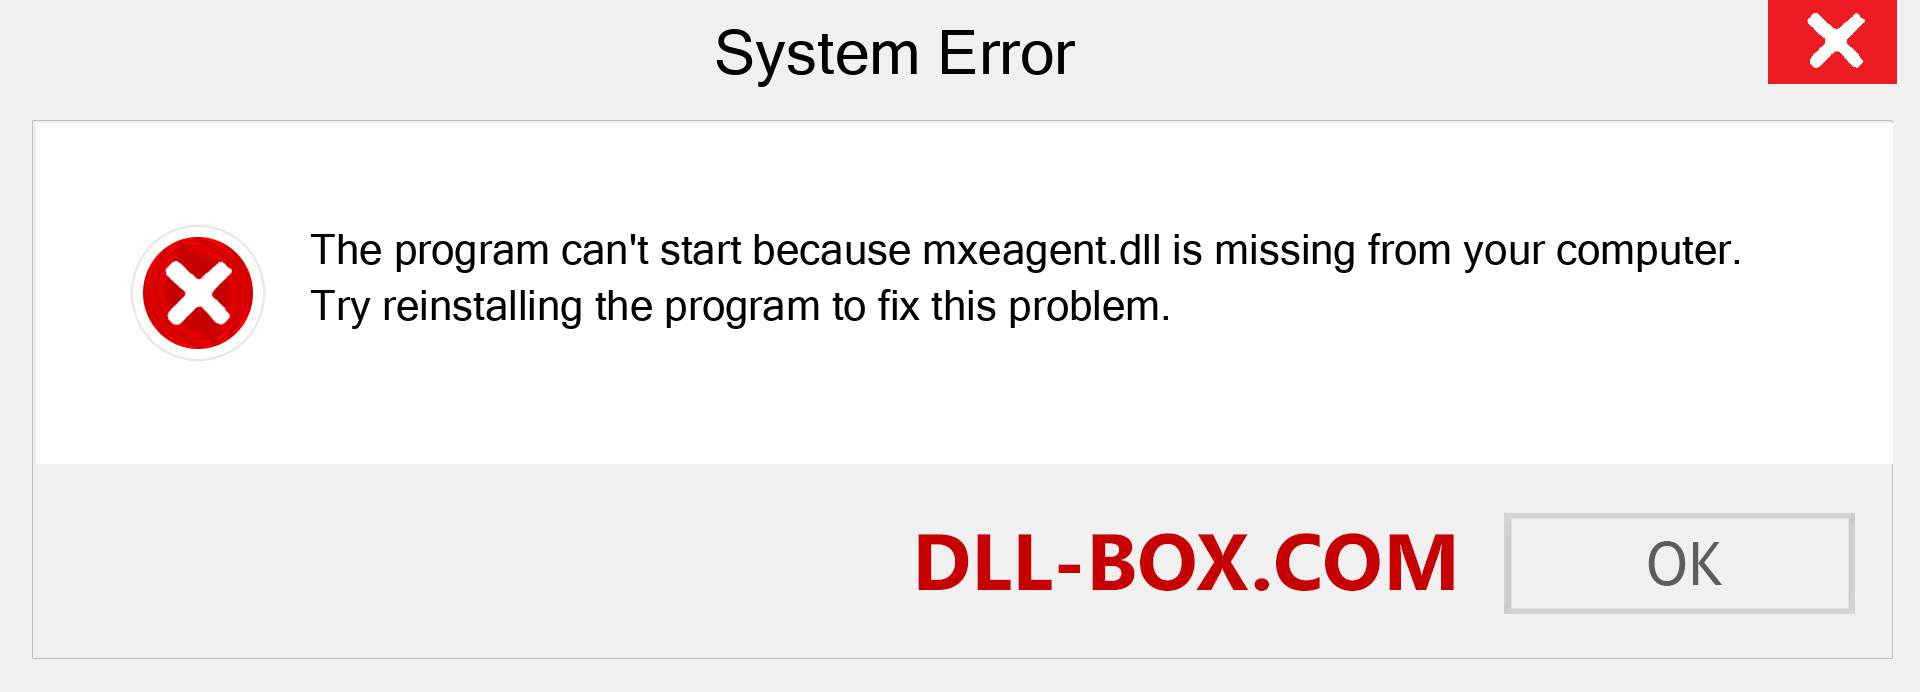  mxeagent.dll file is missing?. Download for Windows 7, 8, 10 - Fix  mxeagent dll Missing Error on Windows, photos, images